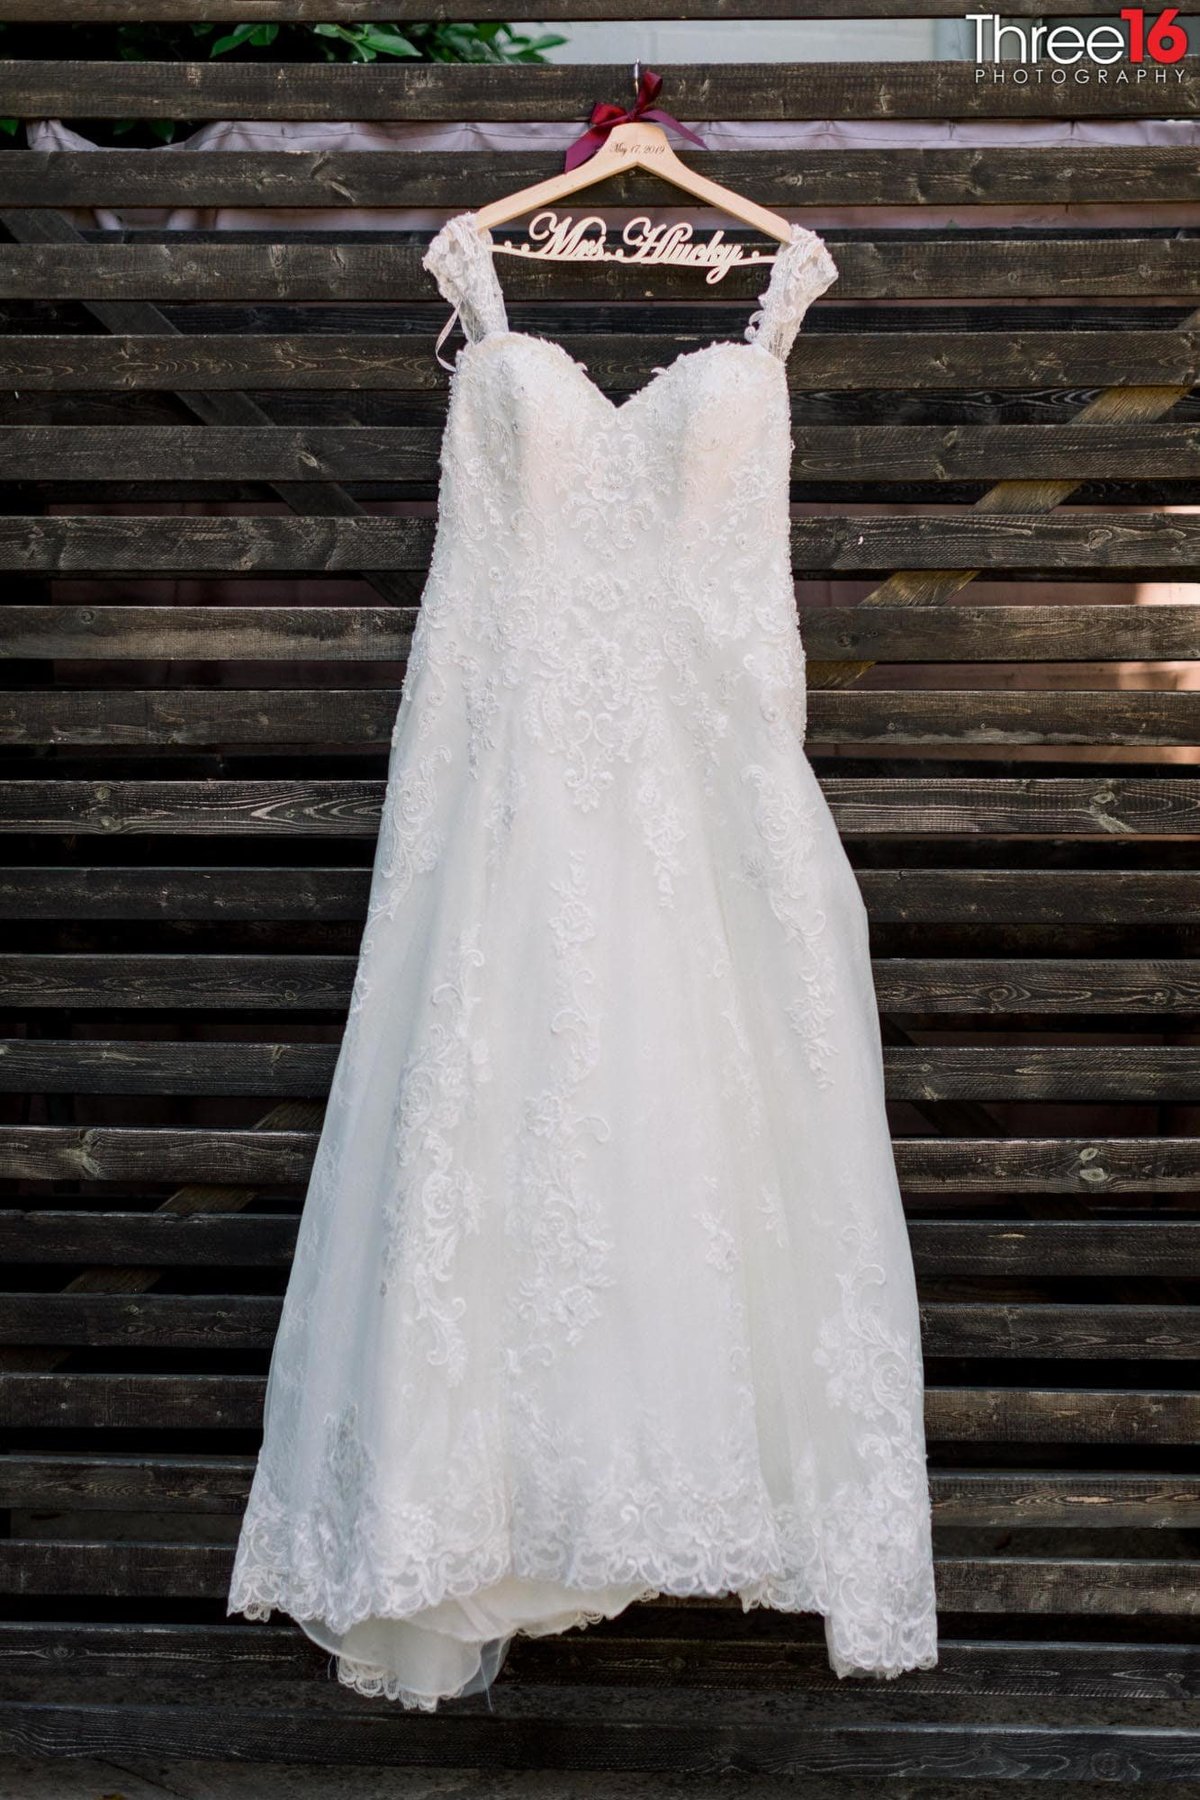 Bride's Wedding Dresses hangs on a rustic background wall